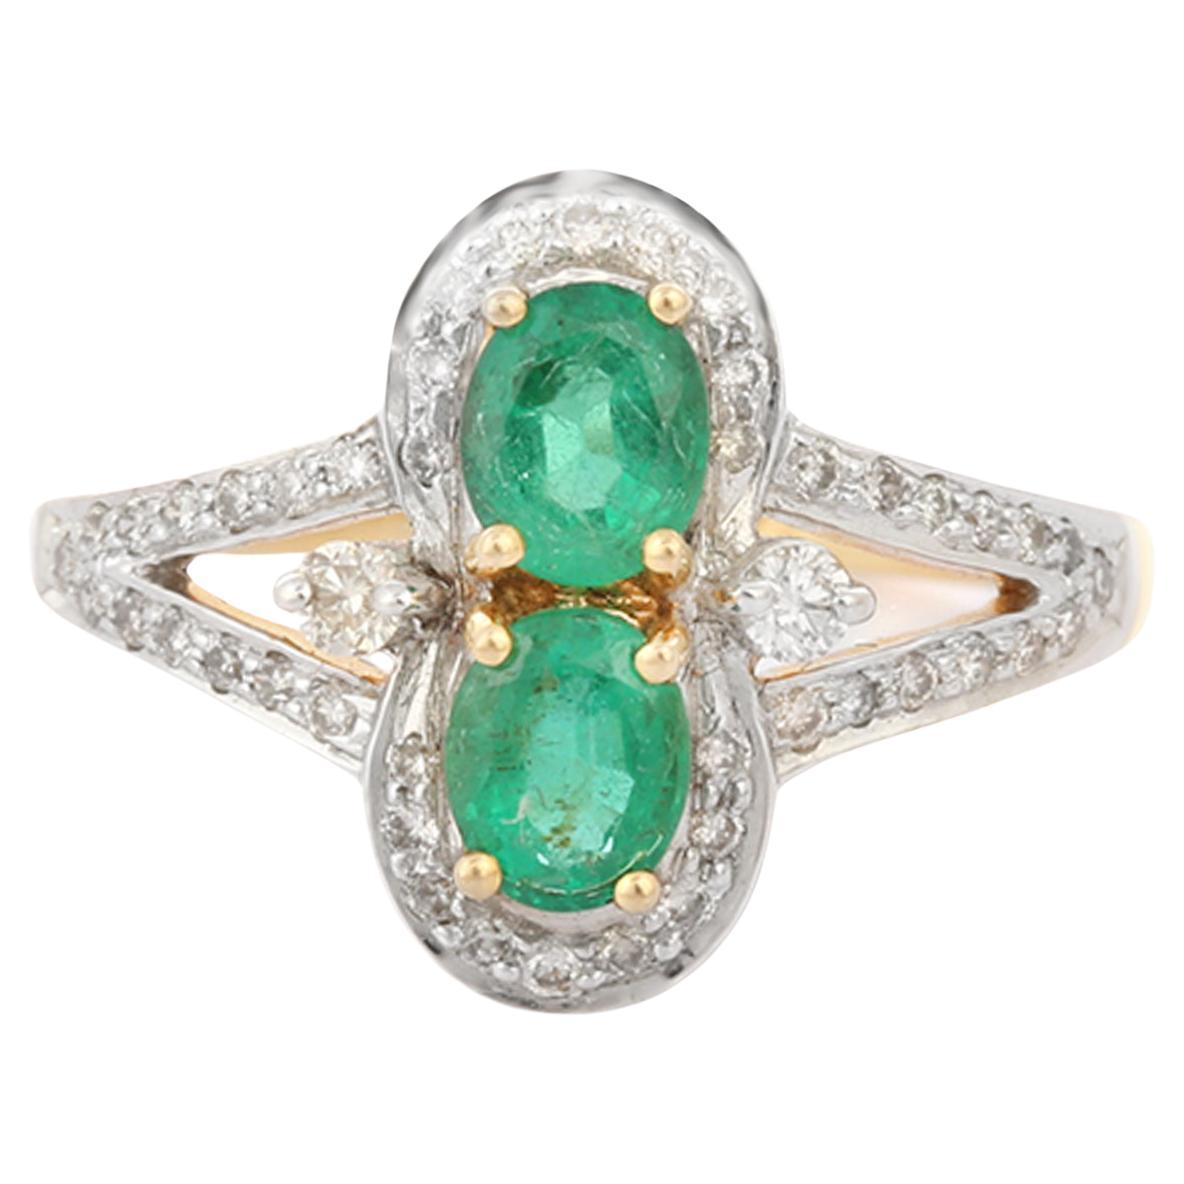 Magnificent Two Emerald Wedding Ring with Halo Diamonds in 18K Yellow Gold 